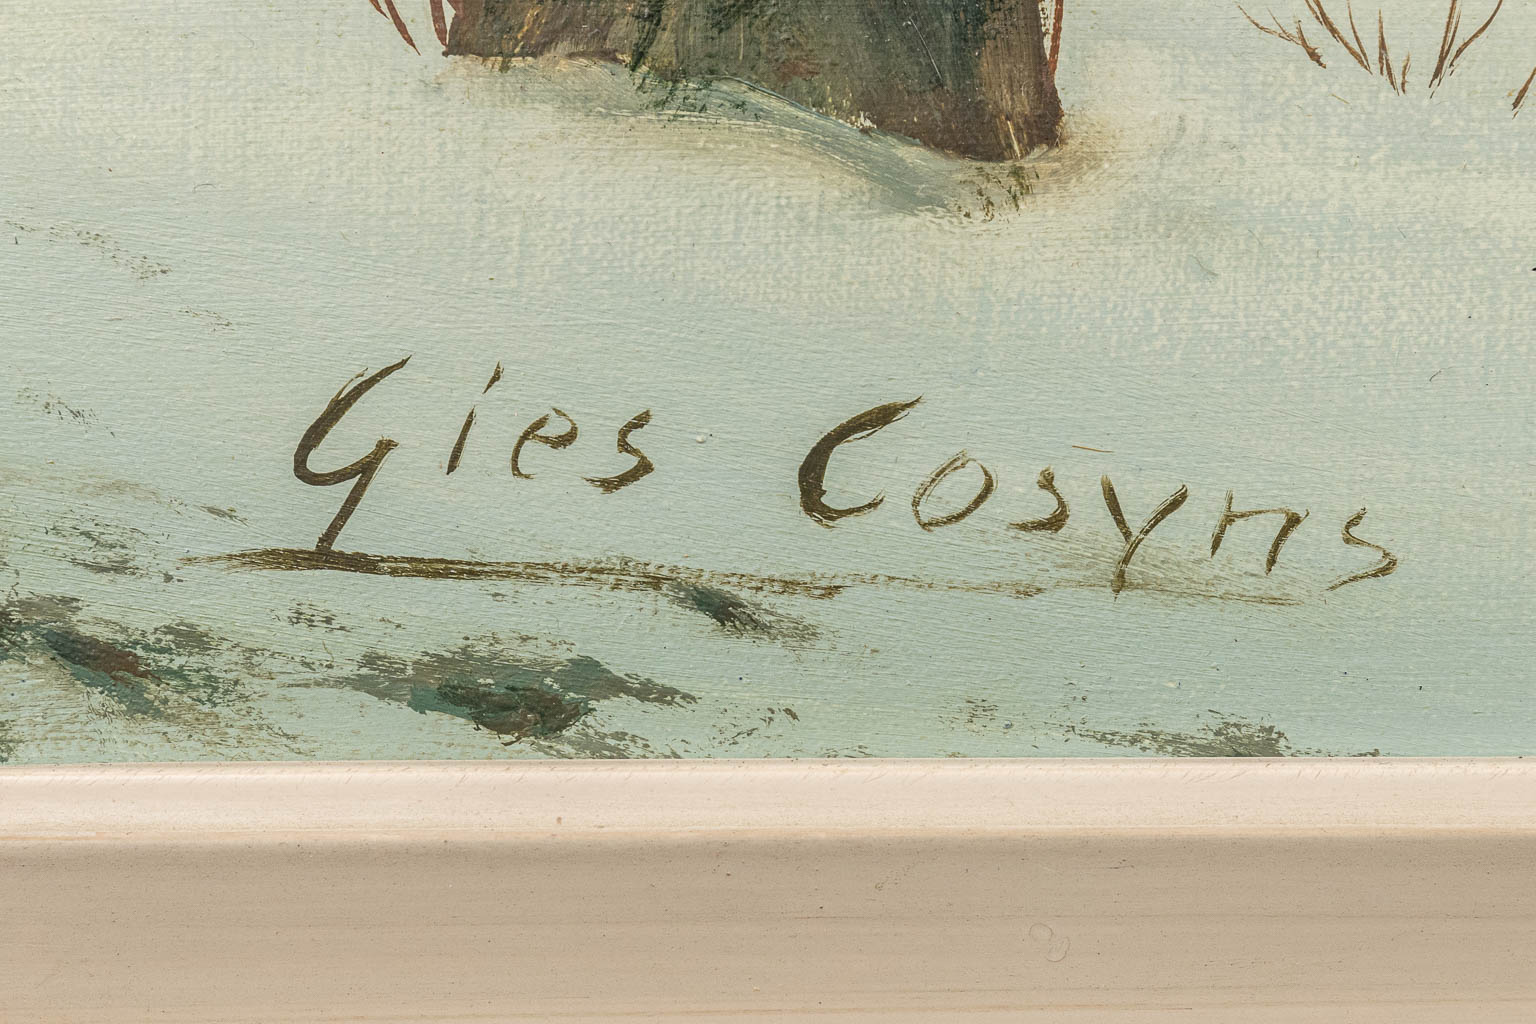 Gies COSYNS (1920-1997) 